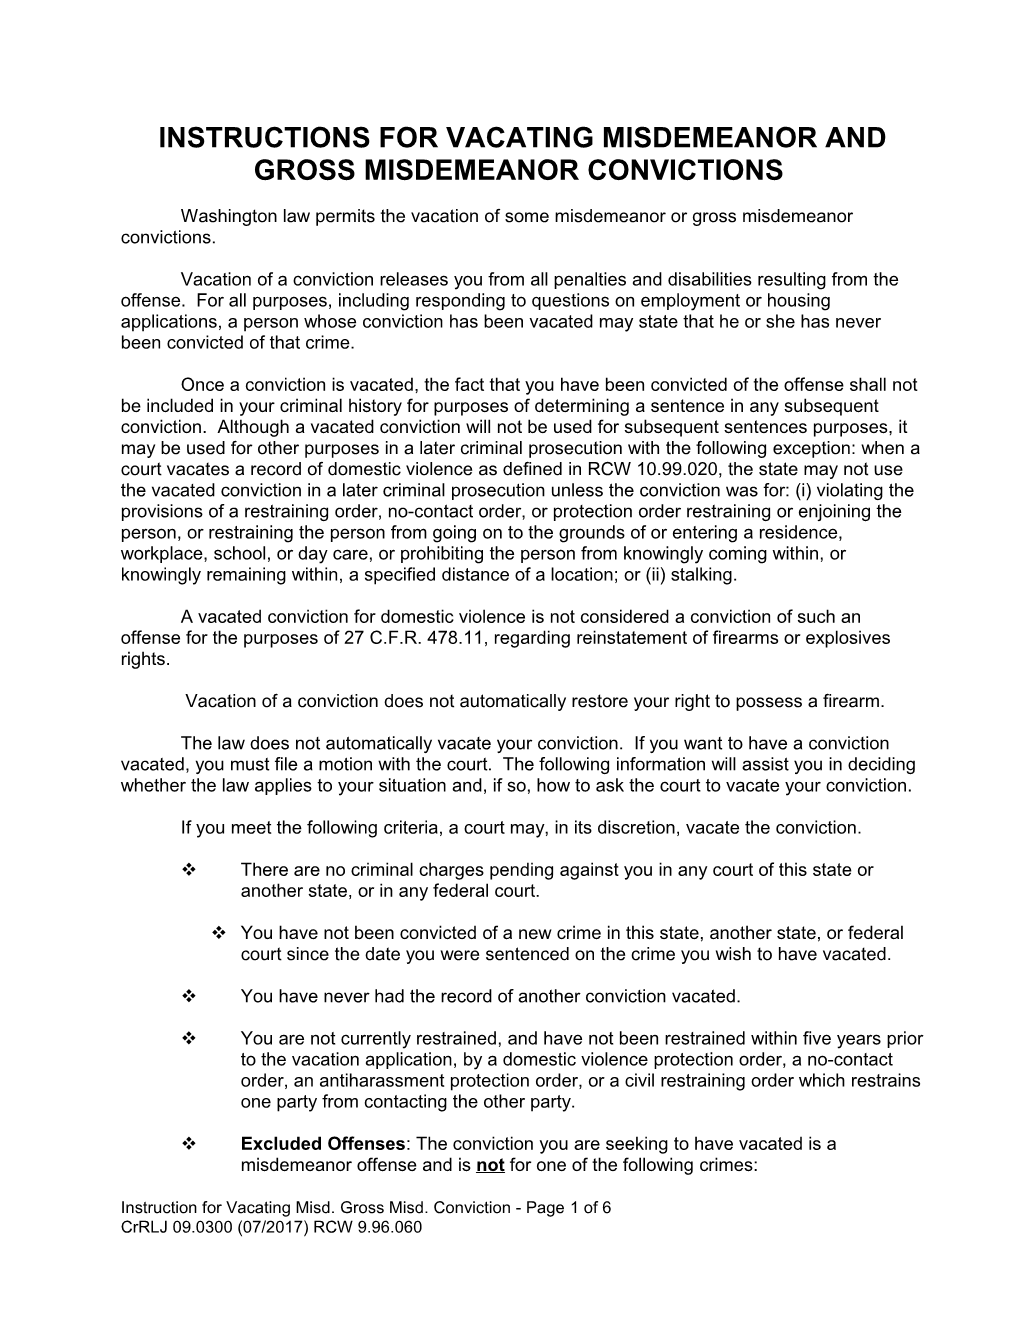 Instructions for Vacating Misdemeanor and Gross Misdemeanor Convictions